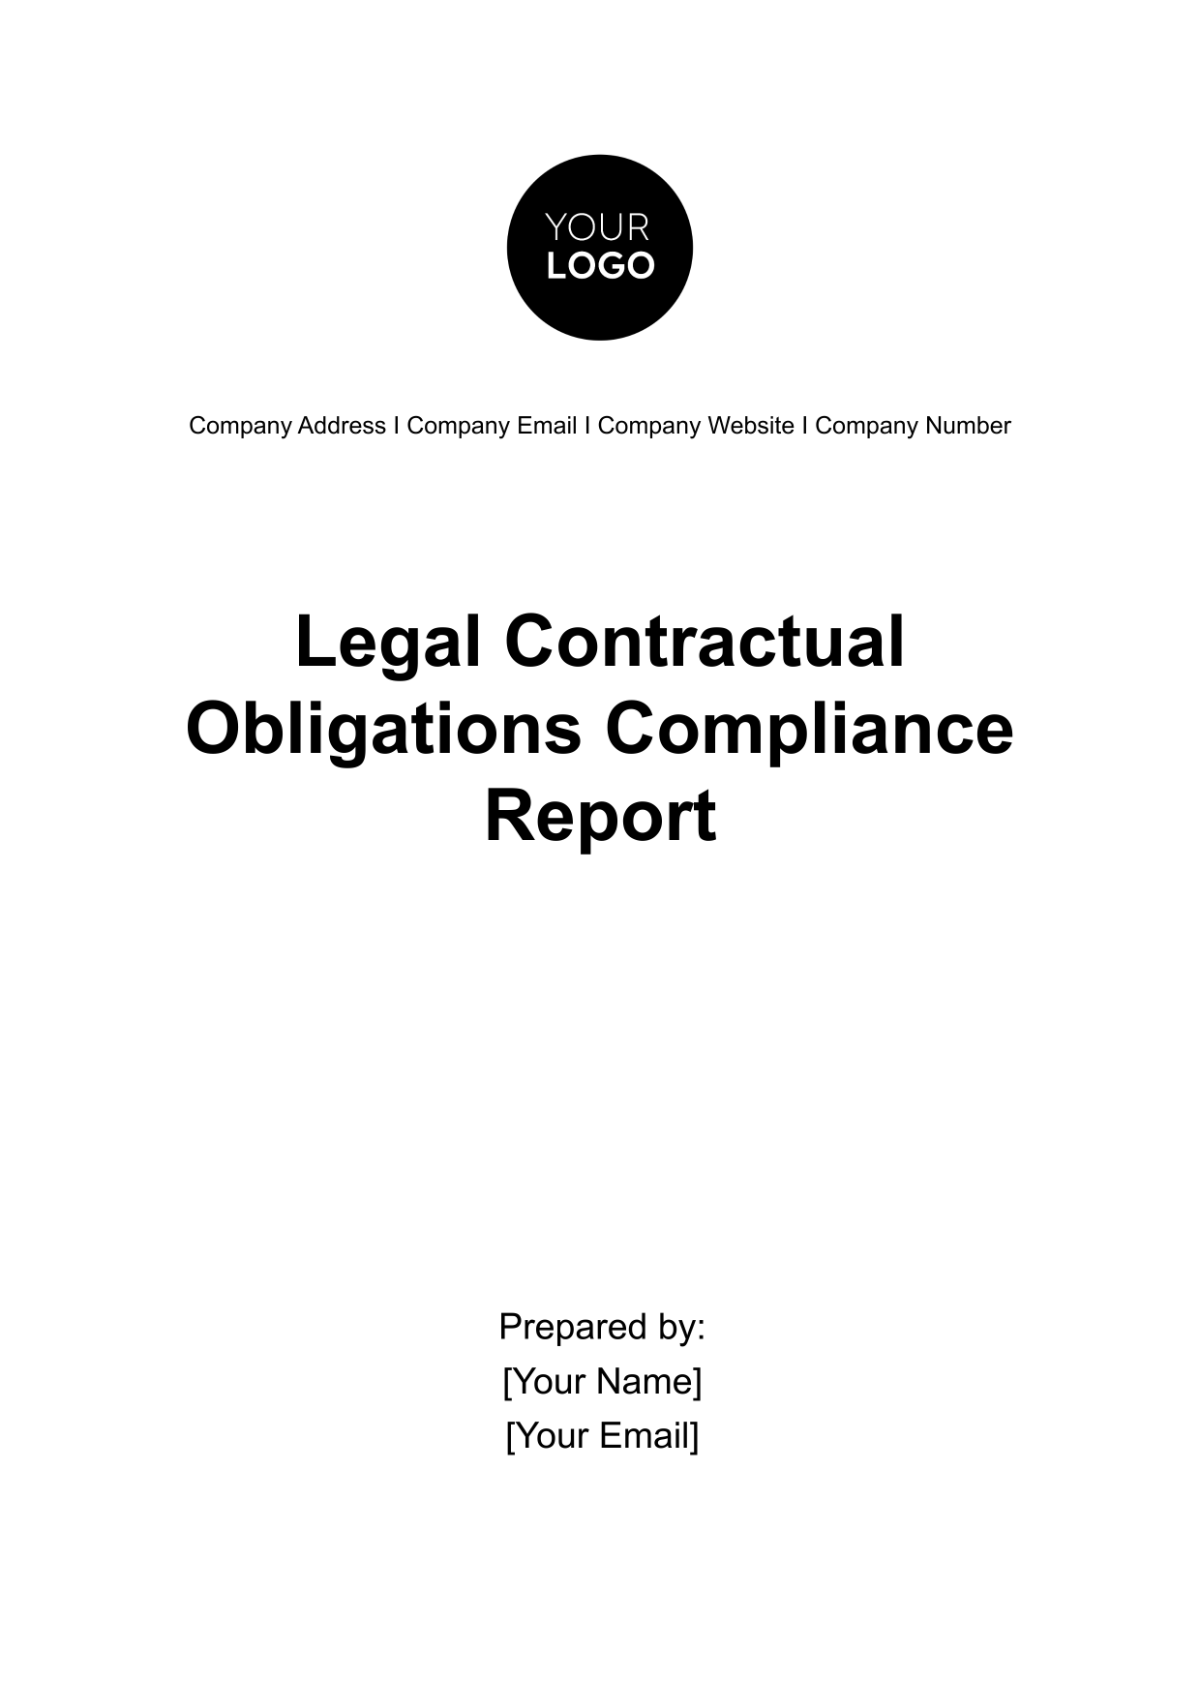 Legal Contractual Obligations Compliance Report Template